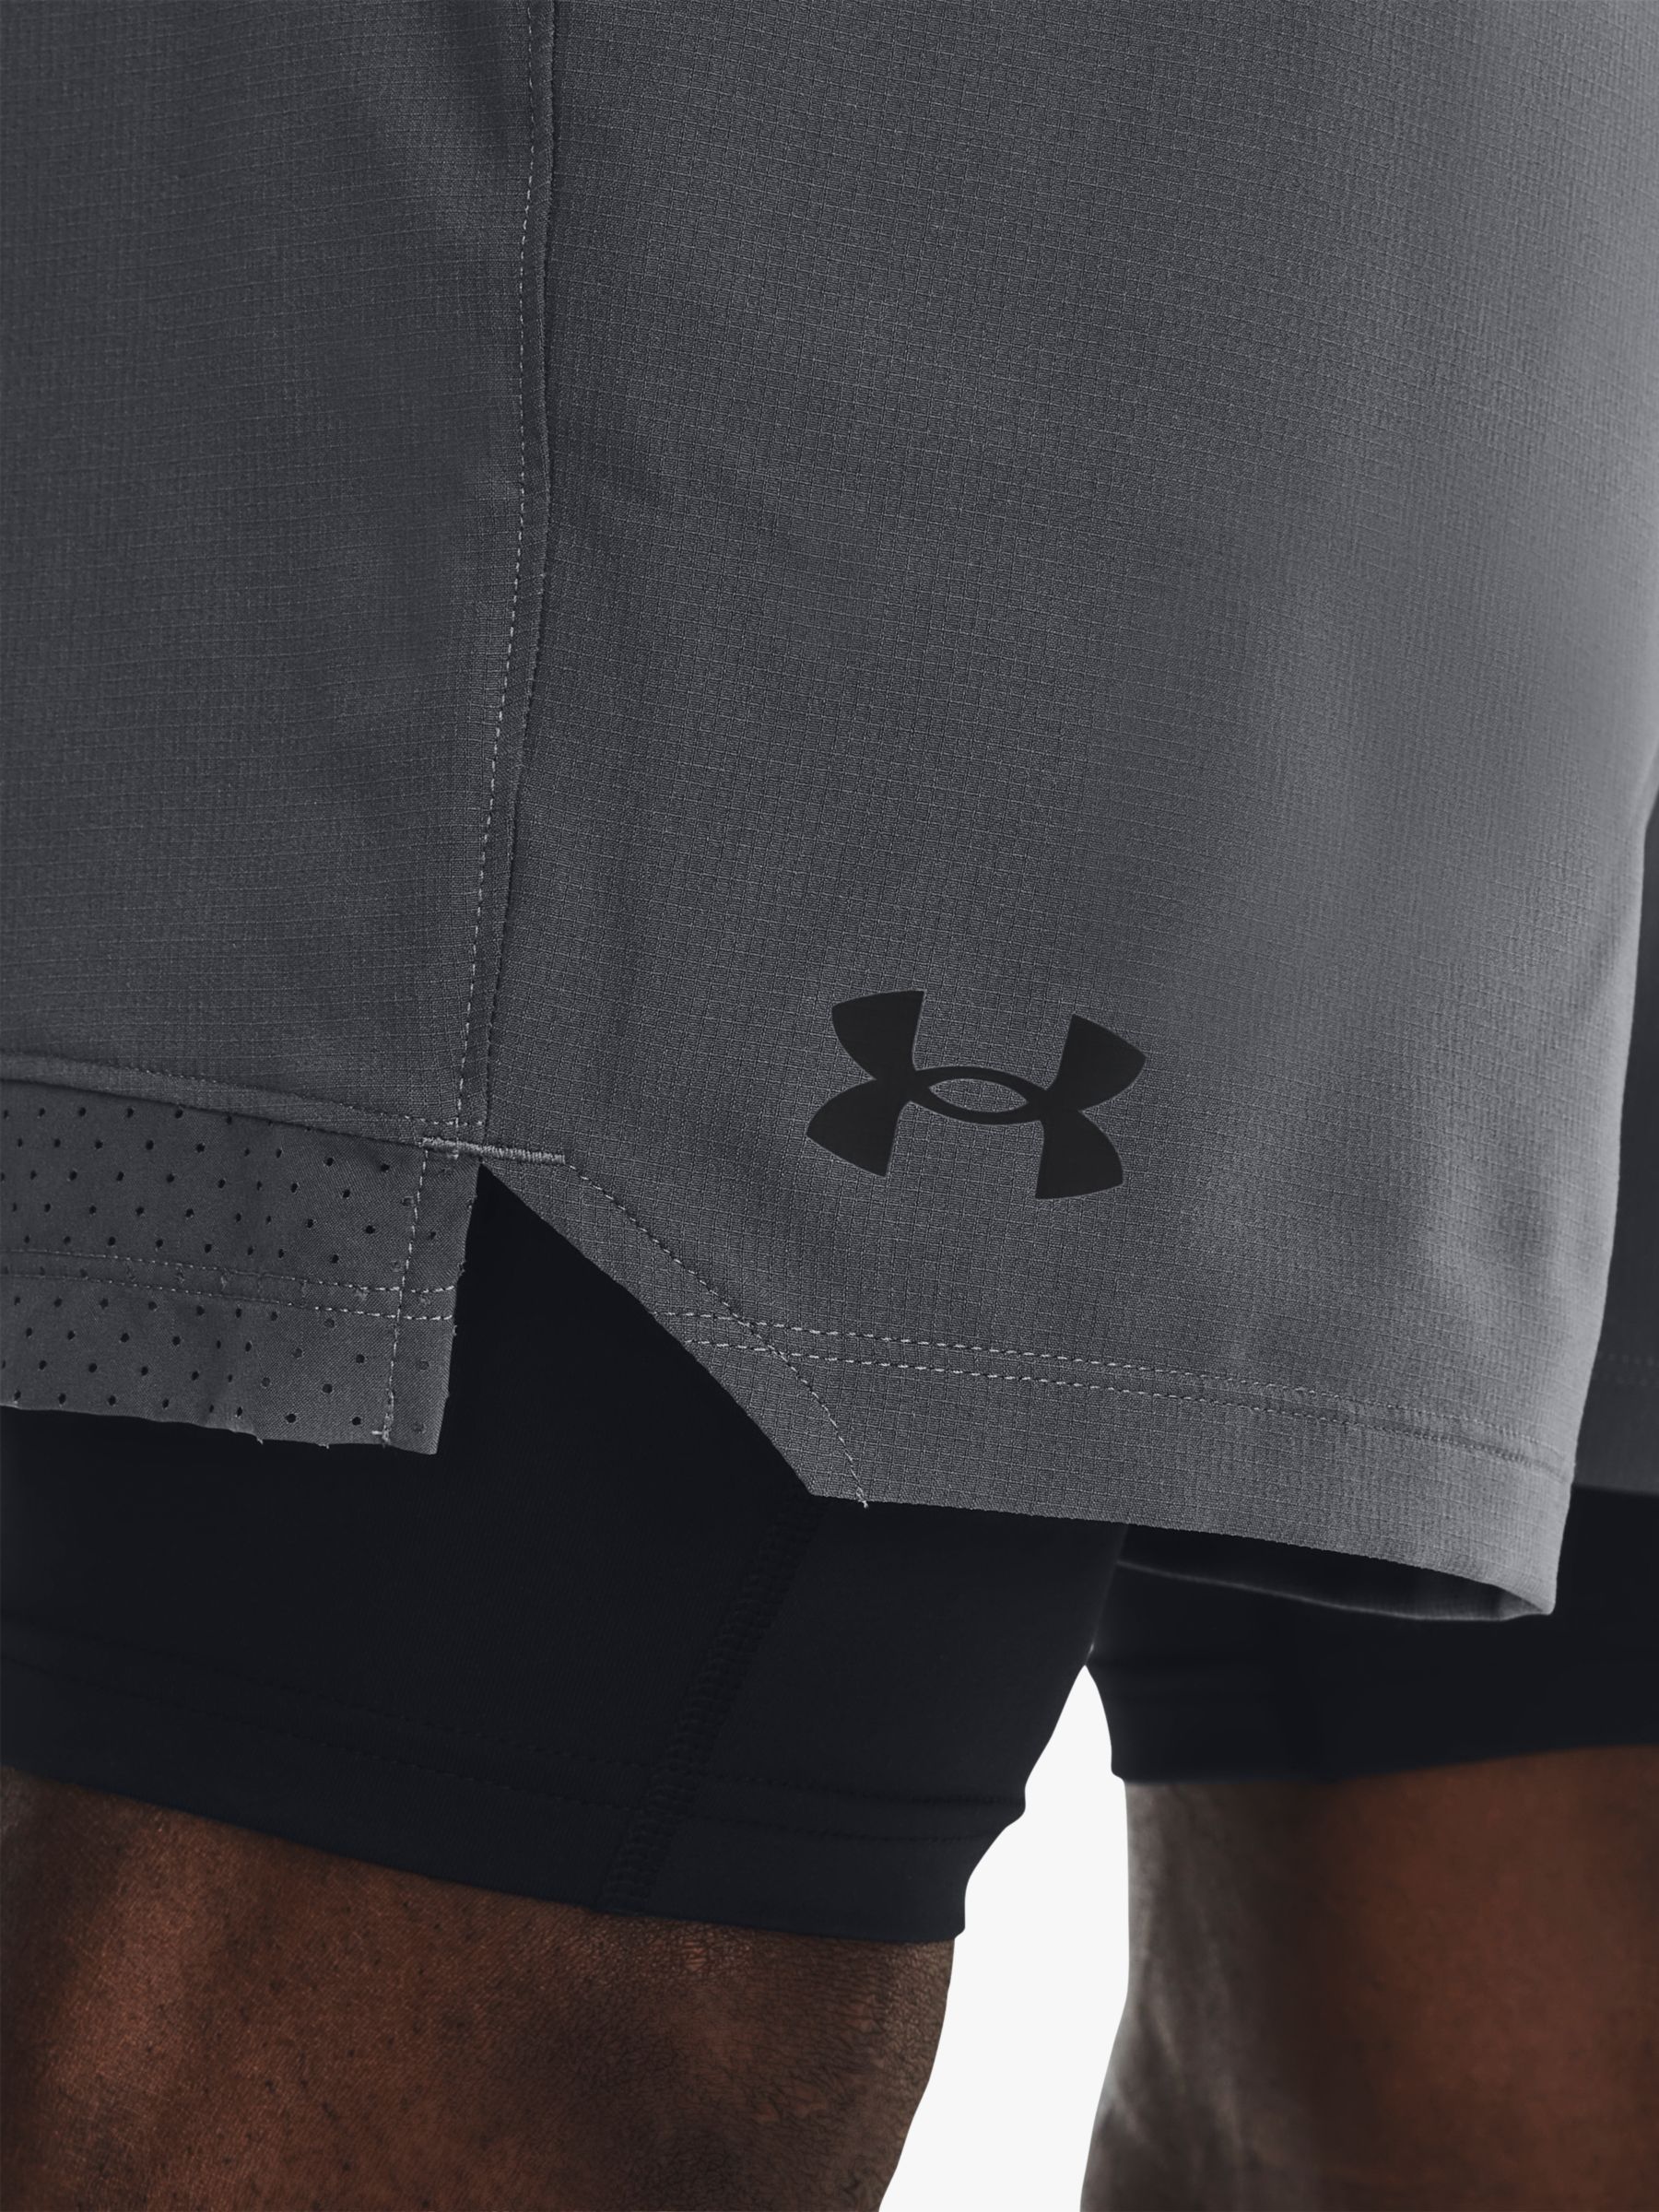 Under Armour Vanish Woven 2-in-1 Gym Shorts, Pitch Grey, S